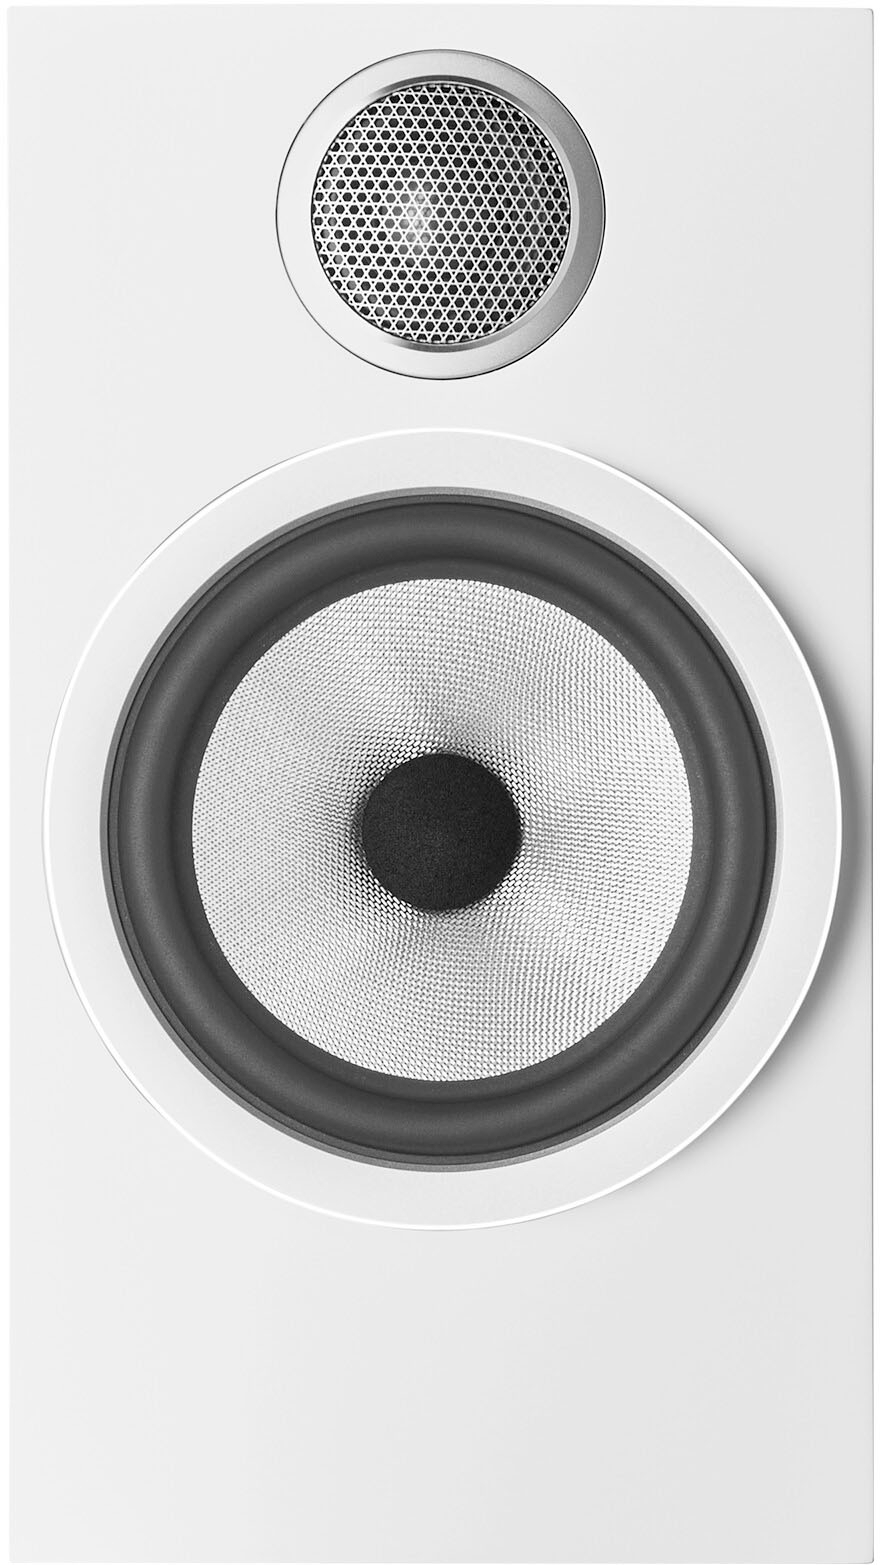 B&W's New 700 Series Is A Major Innovation In Mid-Price Speaker Design